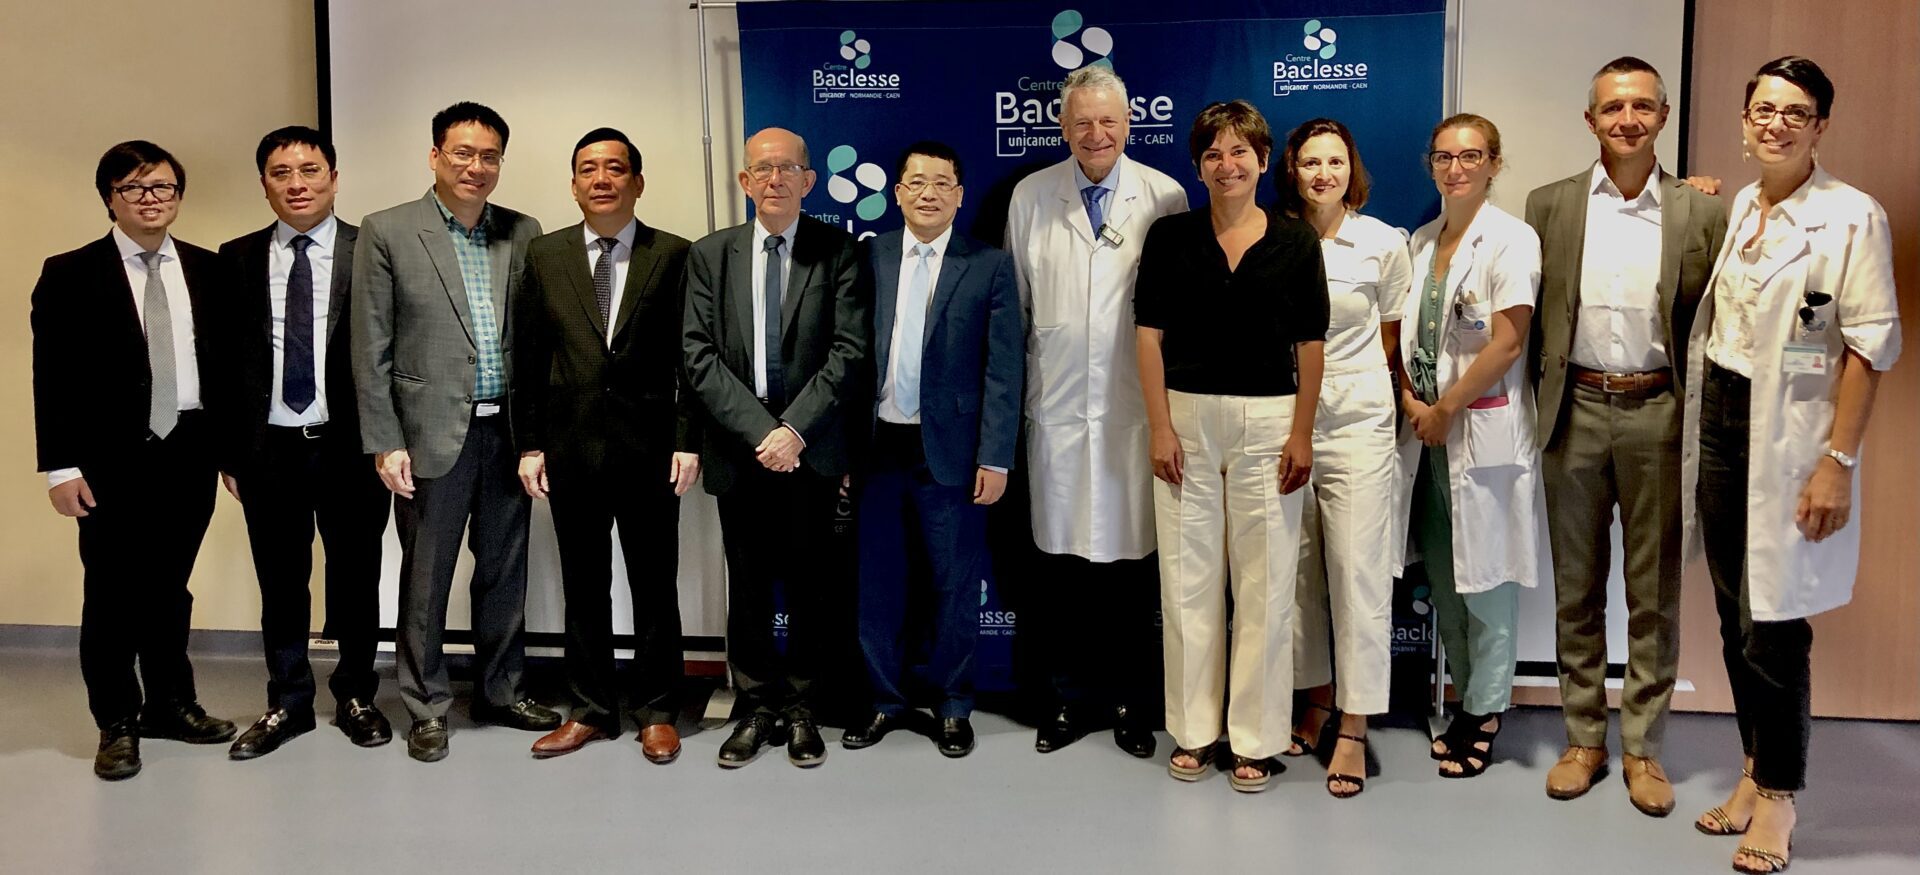 the delegation from the K Hospital in Hanoi to the Baclesse Centre